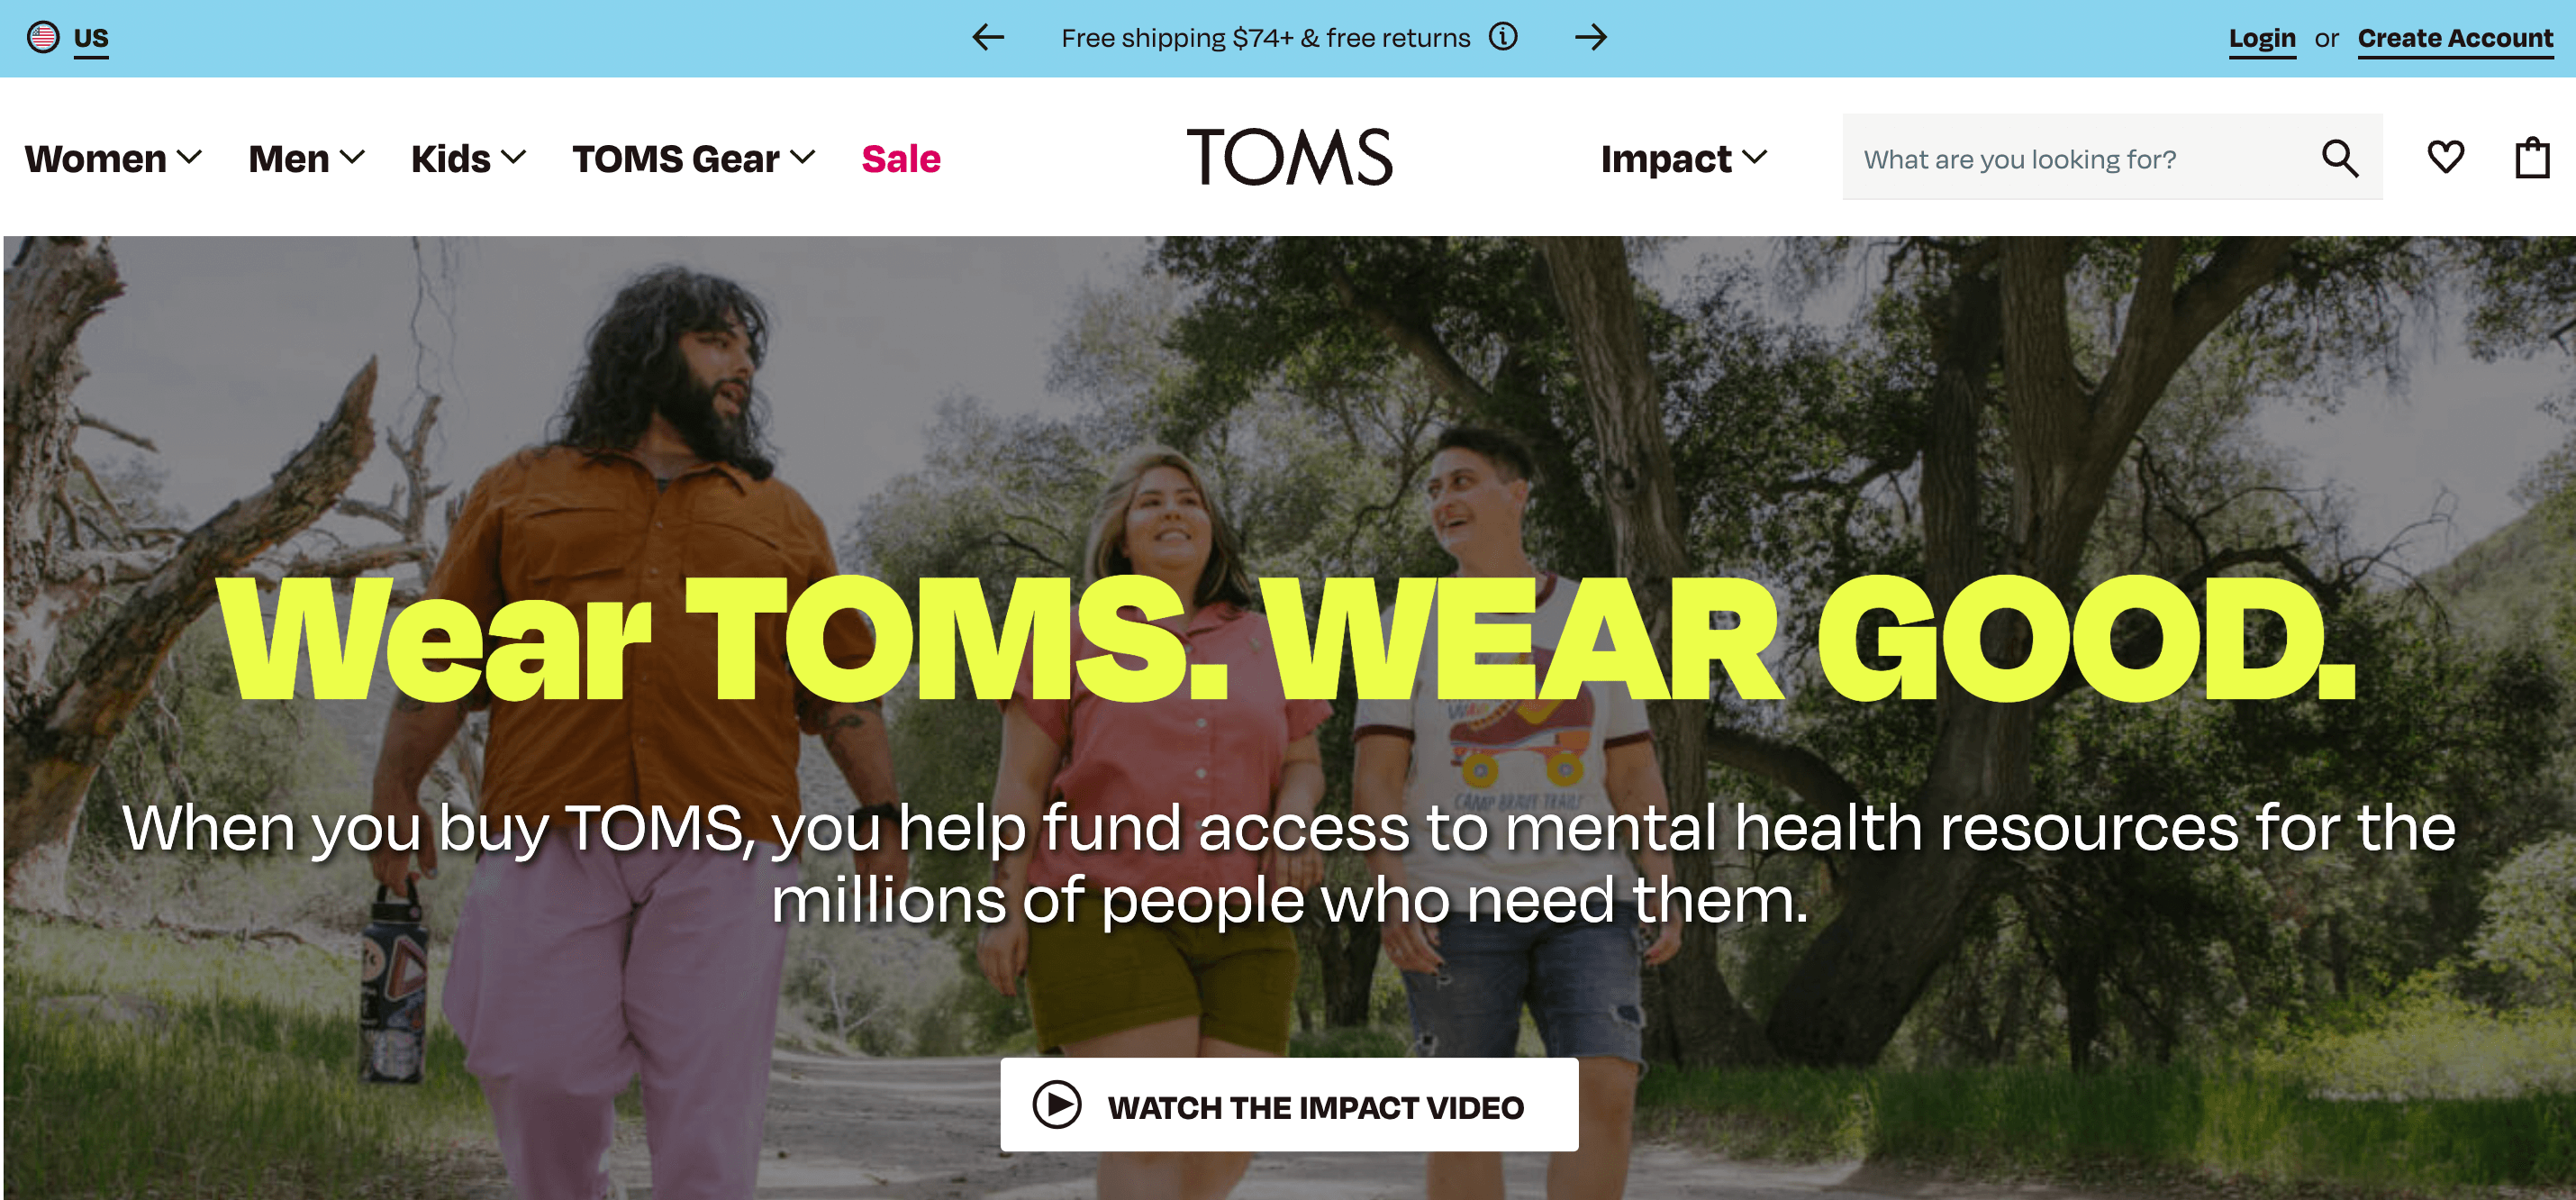 TOMS social responsibility landing page